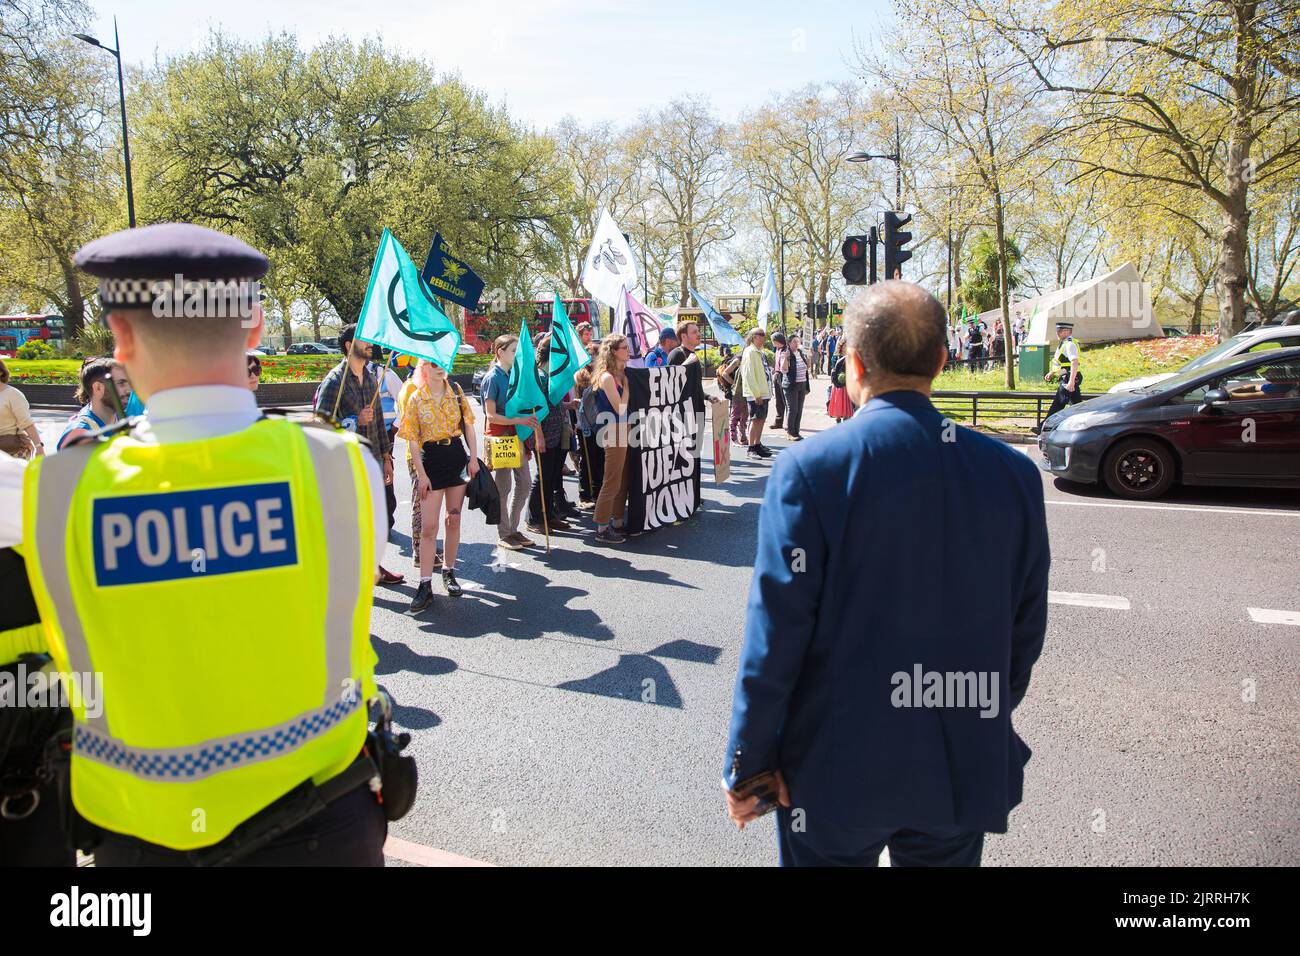 Climate activists gather for Extinction Rebellion’s April actions to call for an end to the fossil fuel economy in central London. Stock Photo